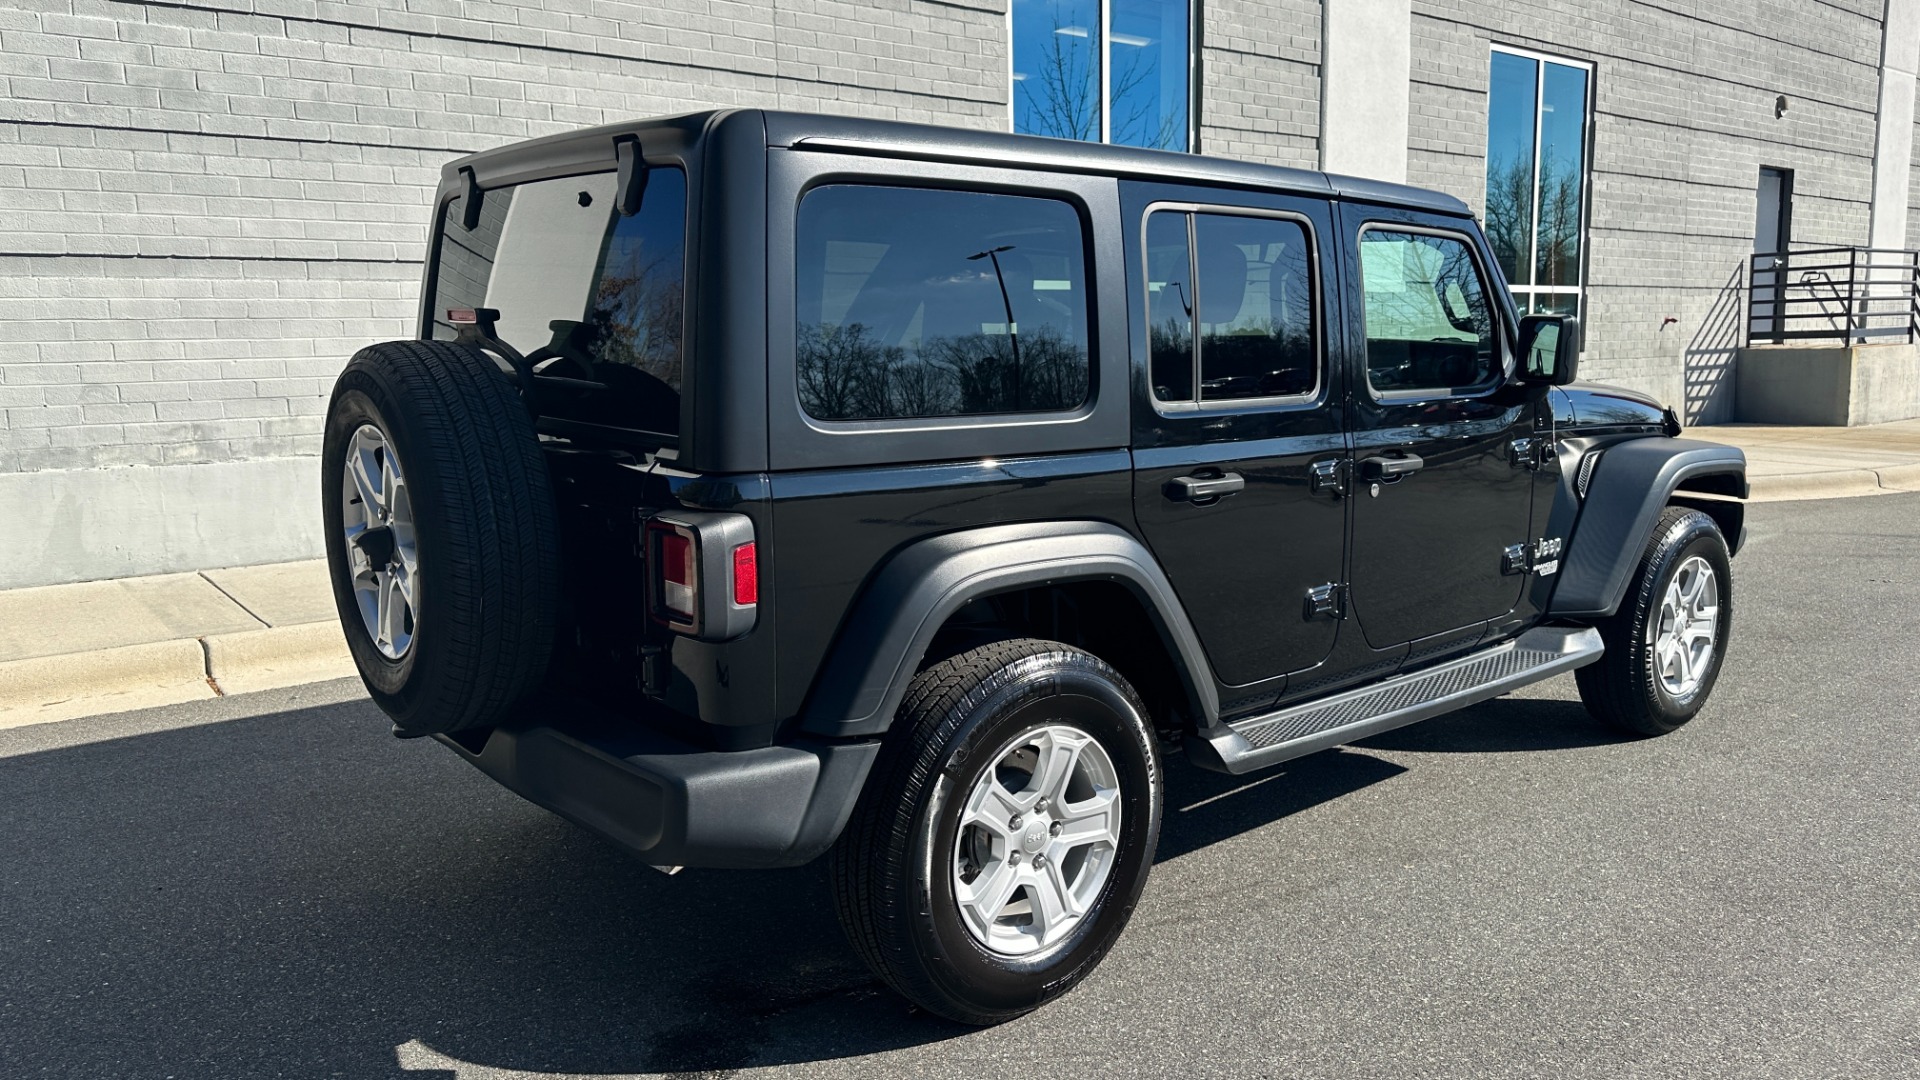 Used 2020 Jeep Wrangler Unlimited SPORT S / TECH PACKAGE / S PACKAGE / BLACK 3 PIECE HARD TOP for sale $25,995 at Formula Imports in Charlotte NC 28227 4